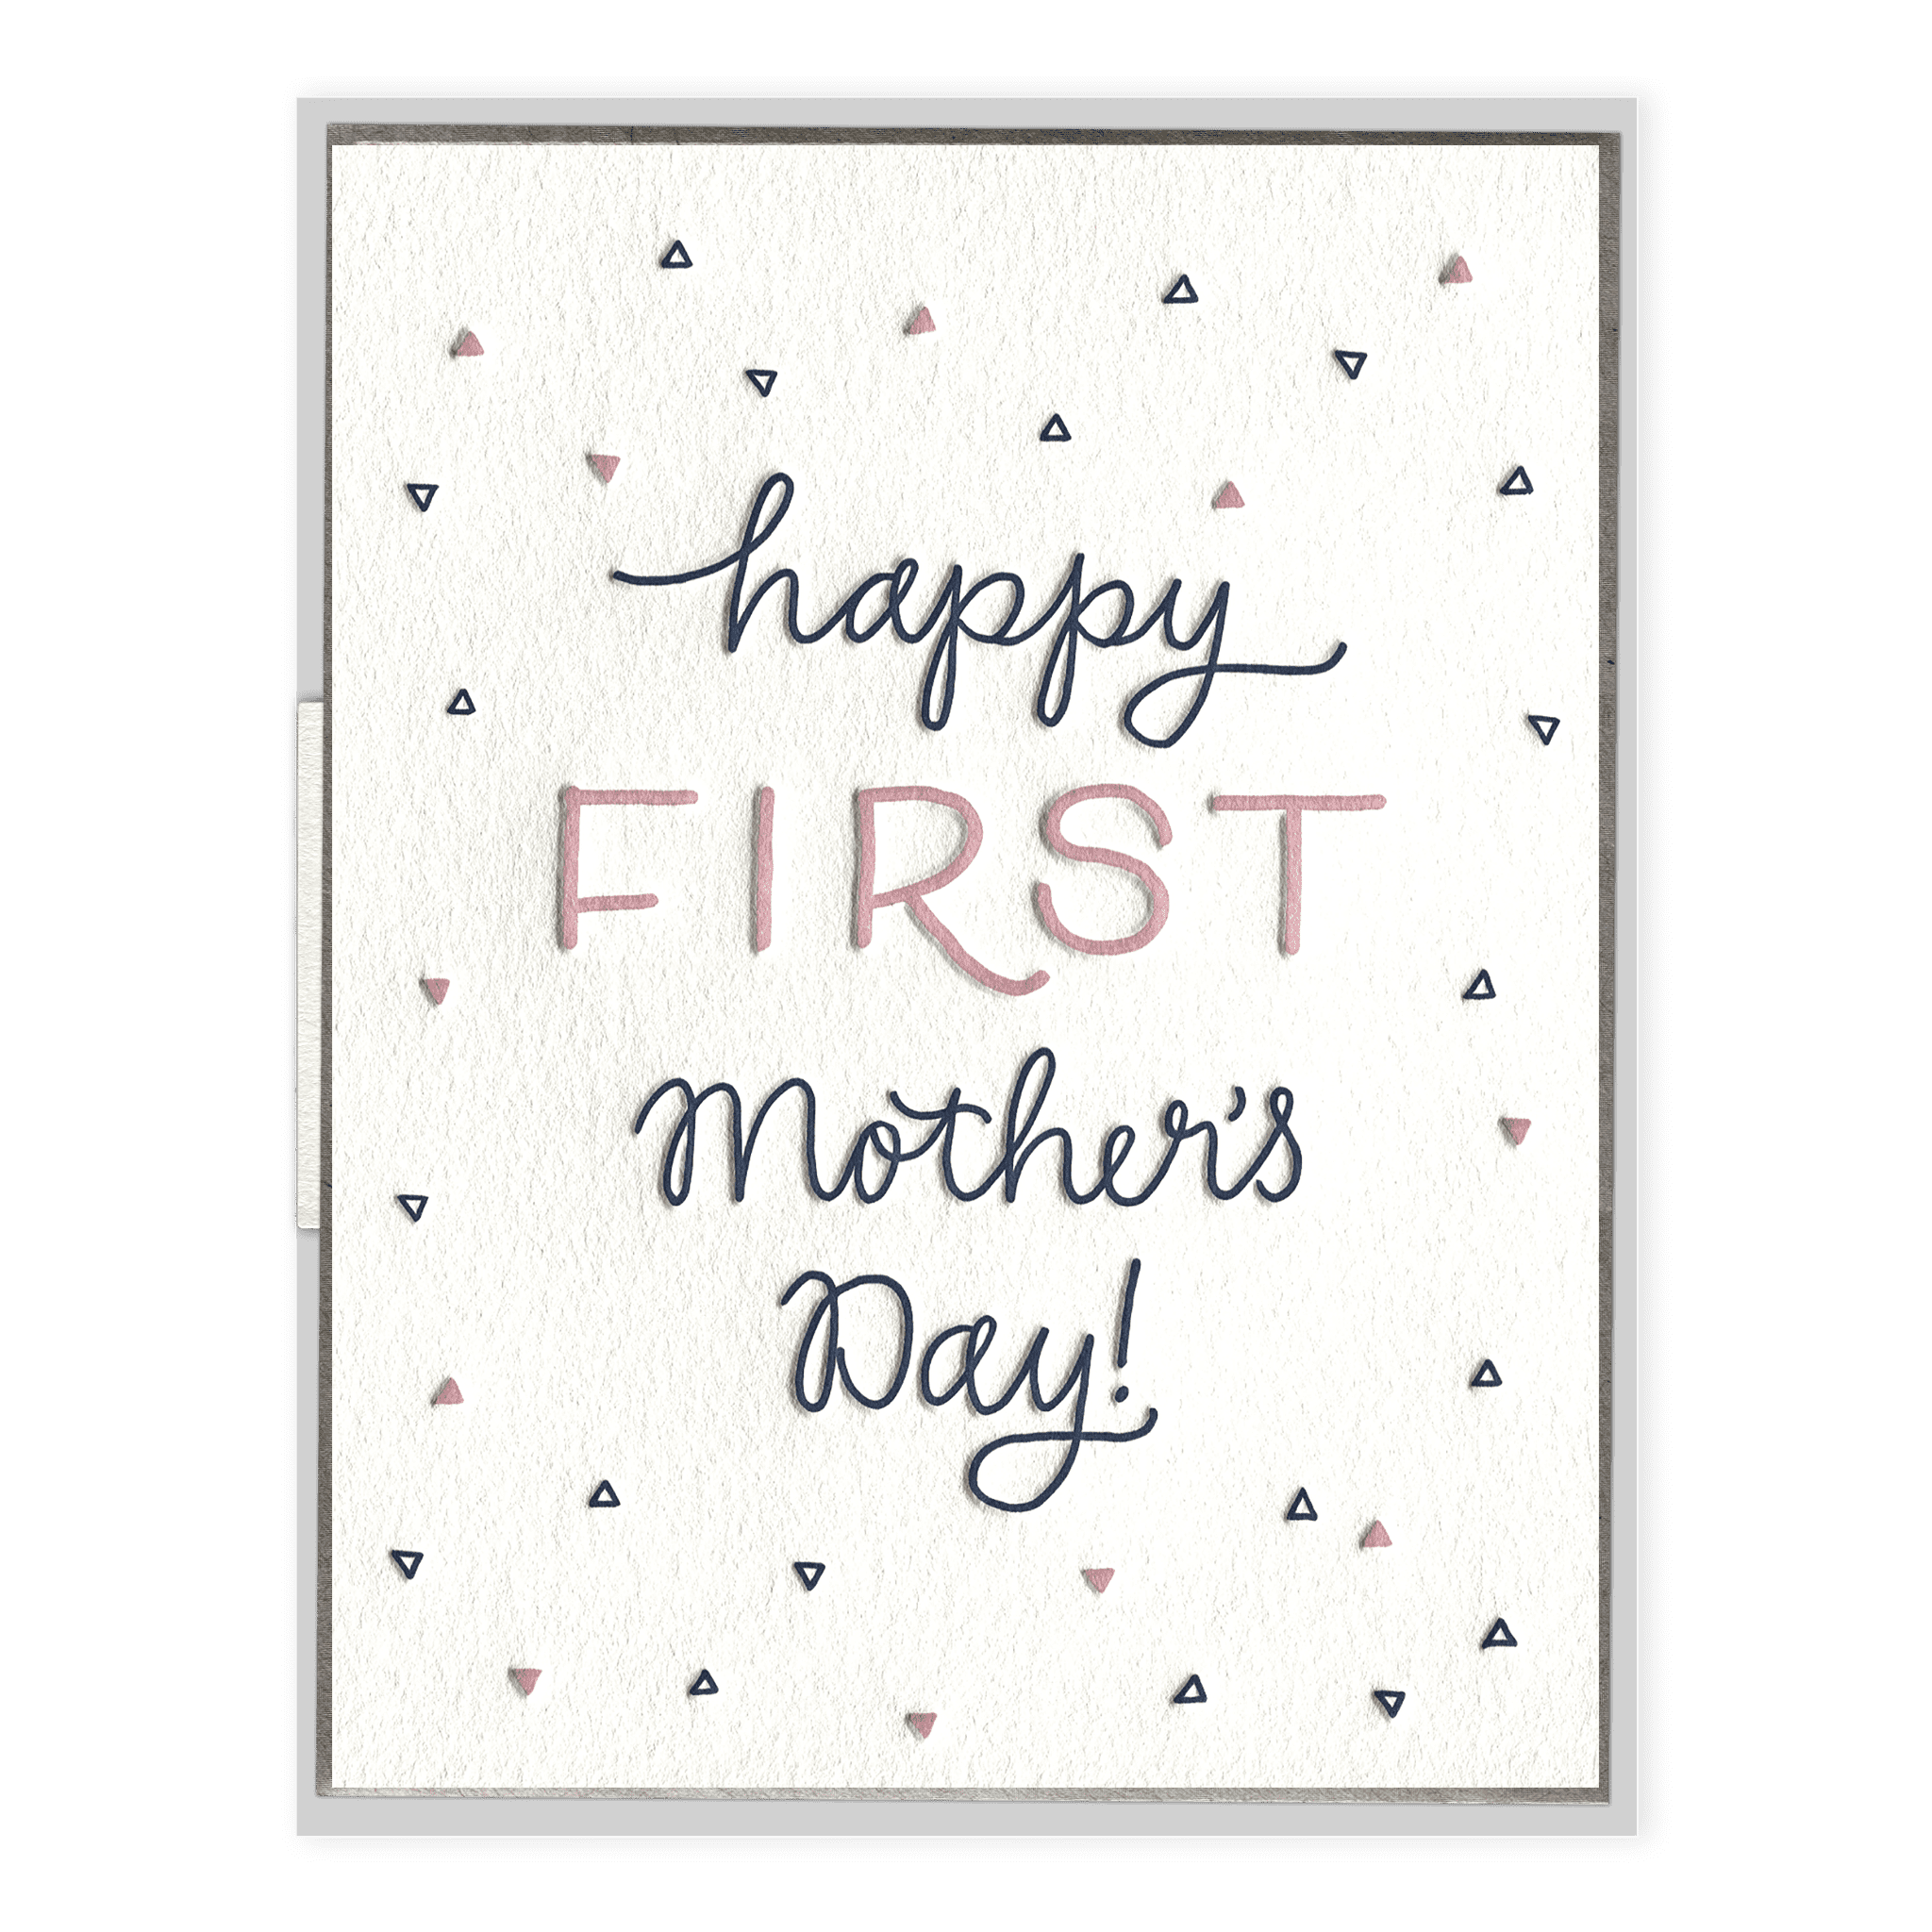 first-mothers-day-card-message-minimalist-choose-from-thousands-of